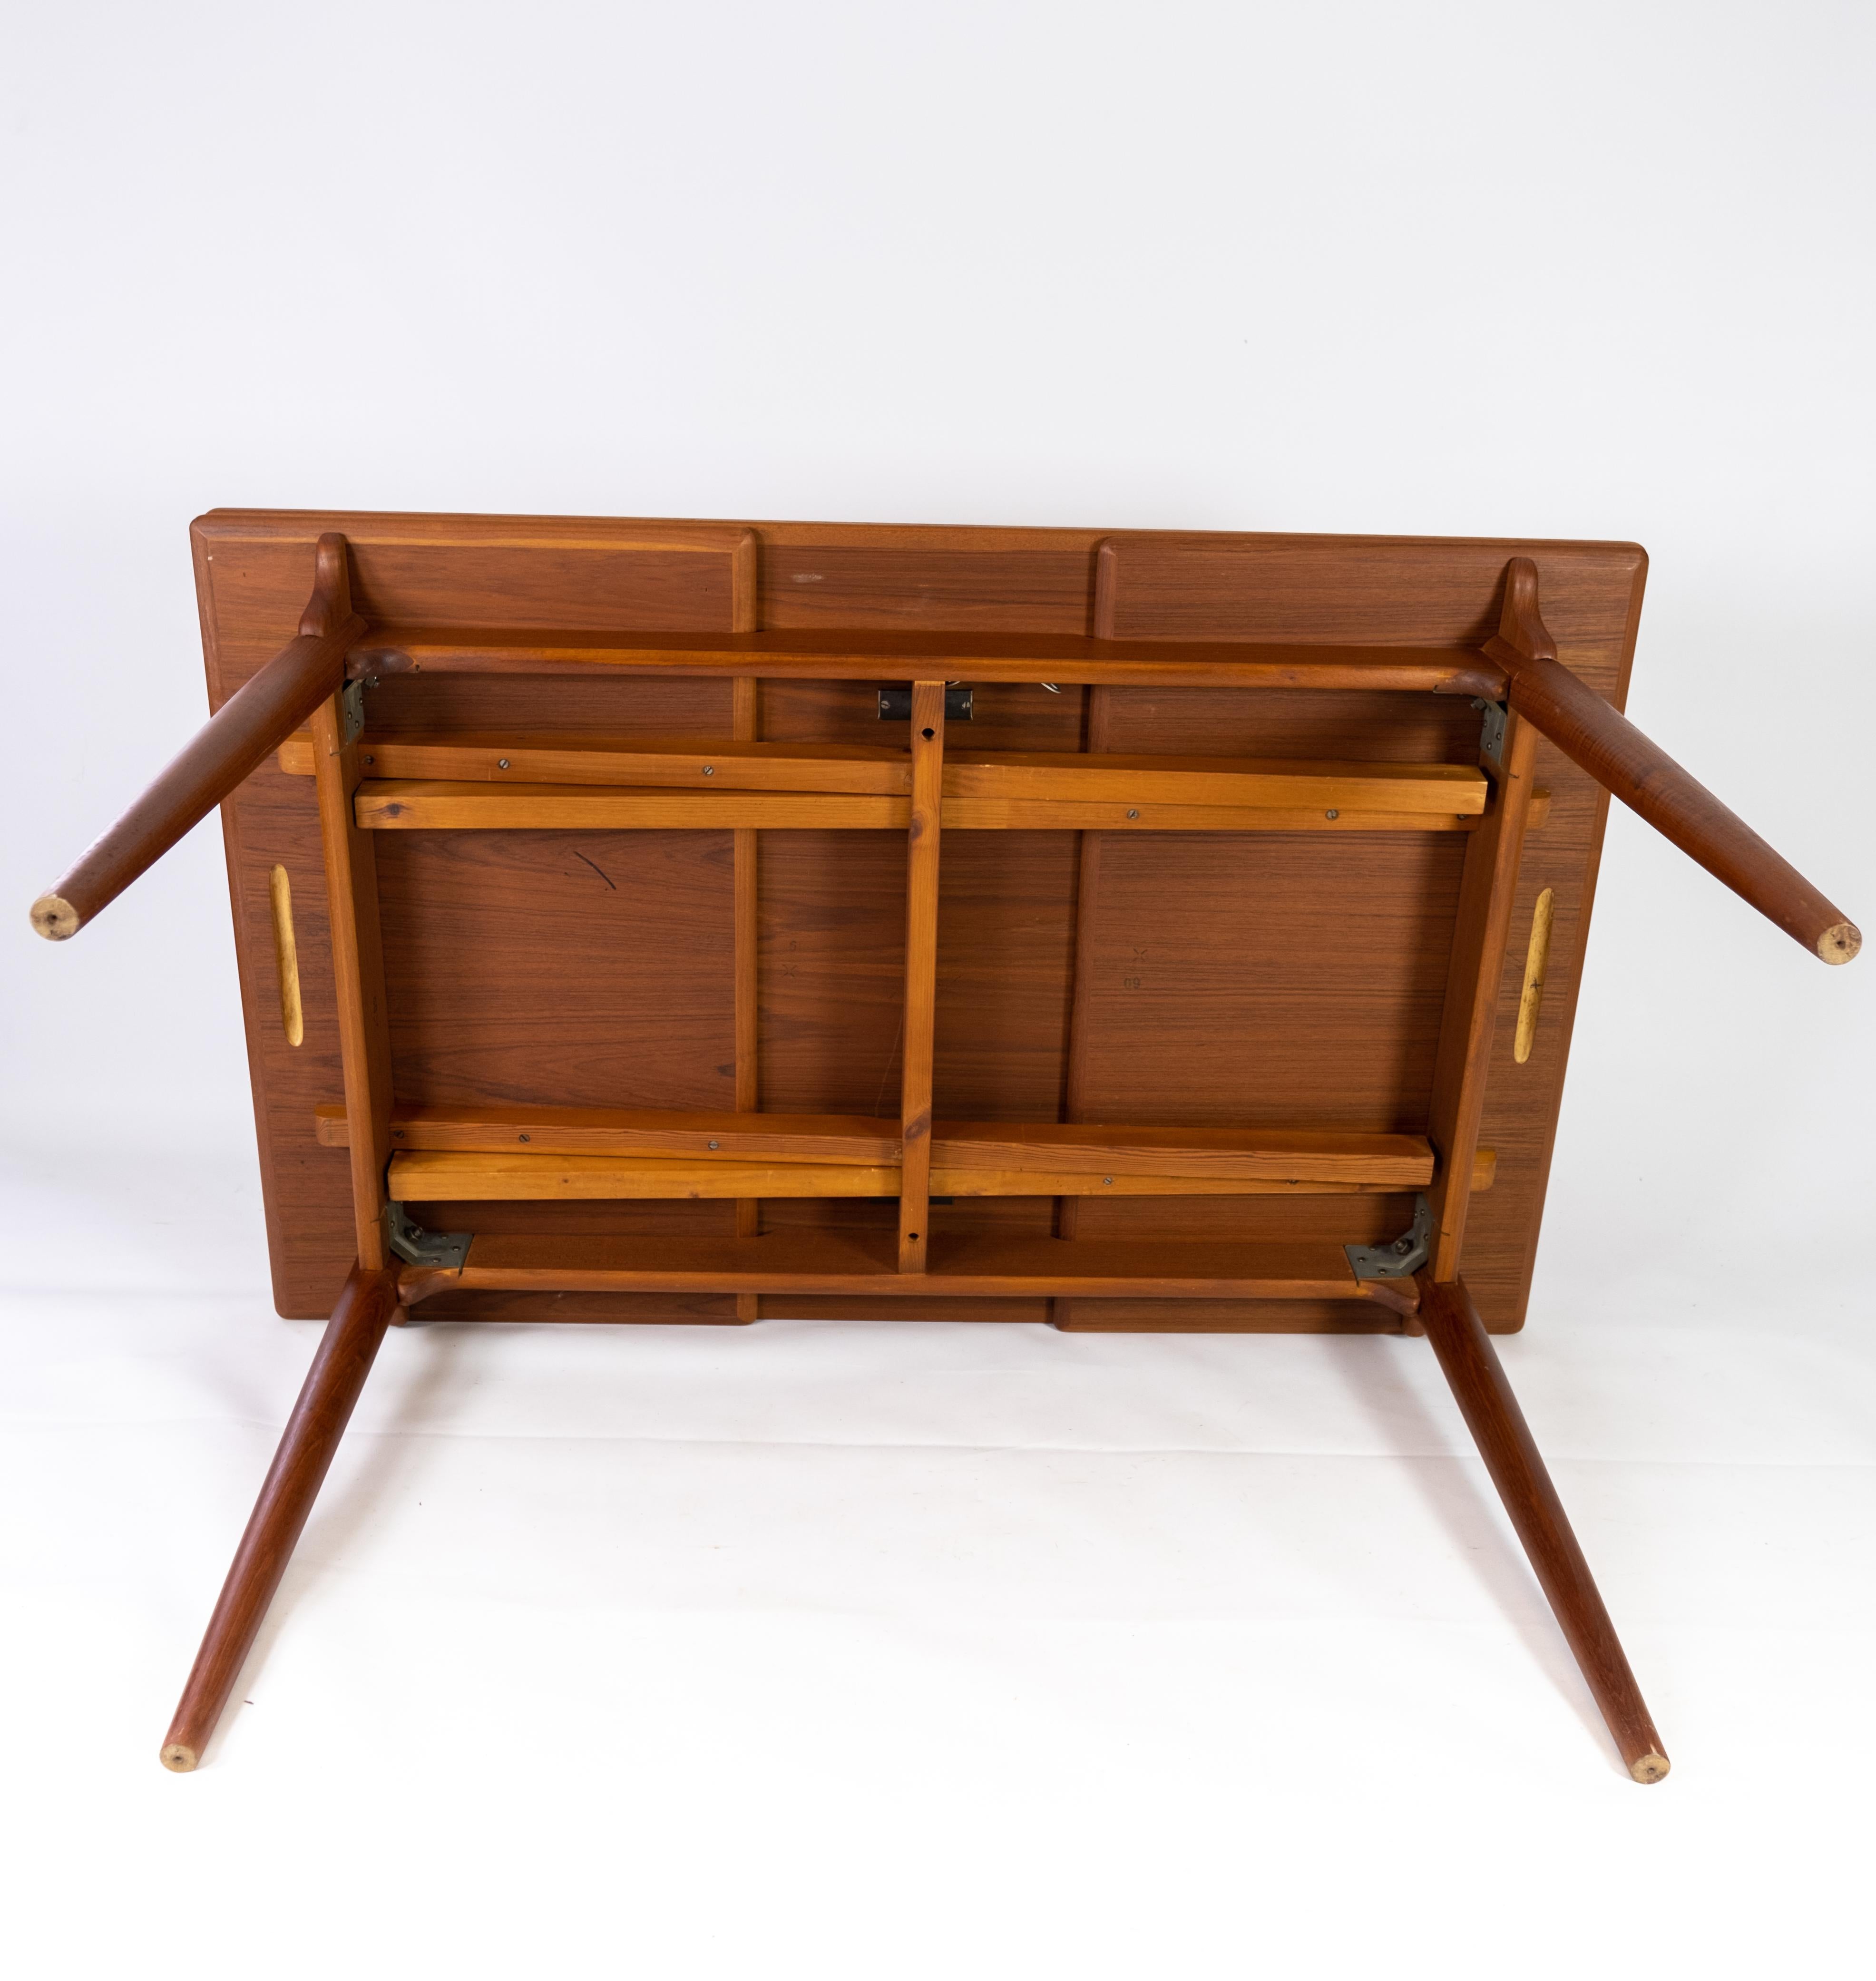 Dining Table Made In Teak With Extentions, Danish Design From 1960s For Sale 7